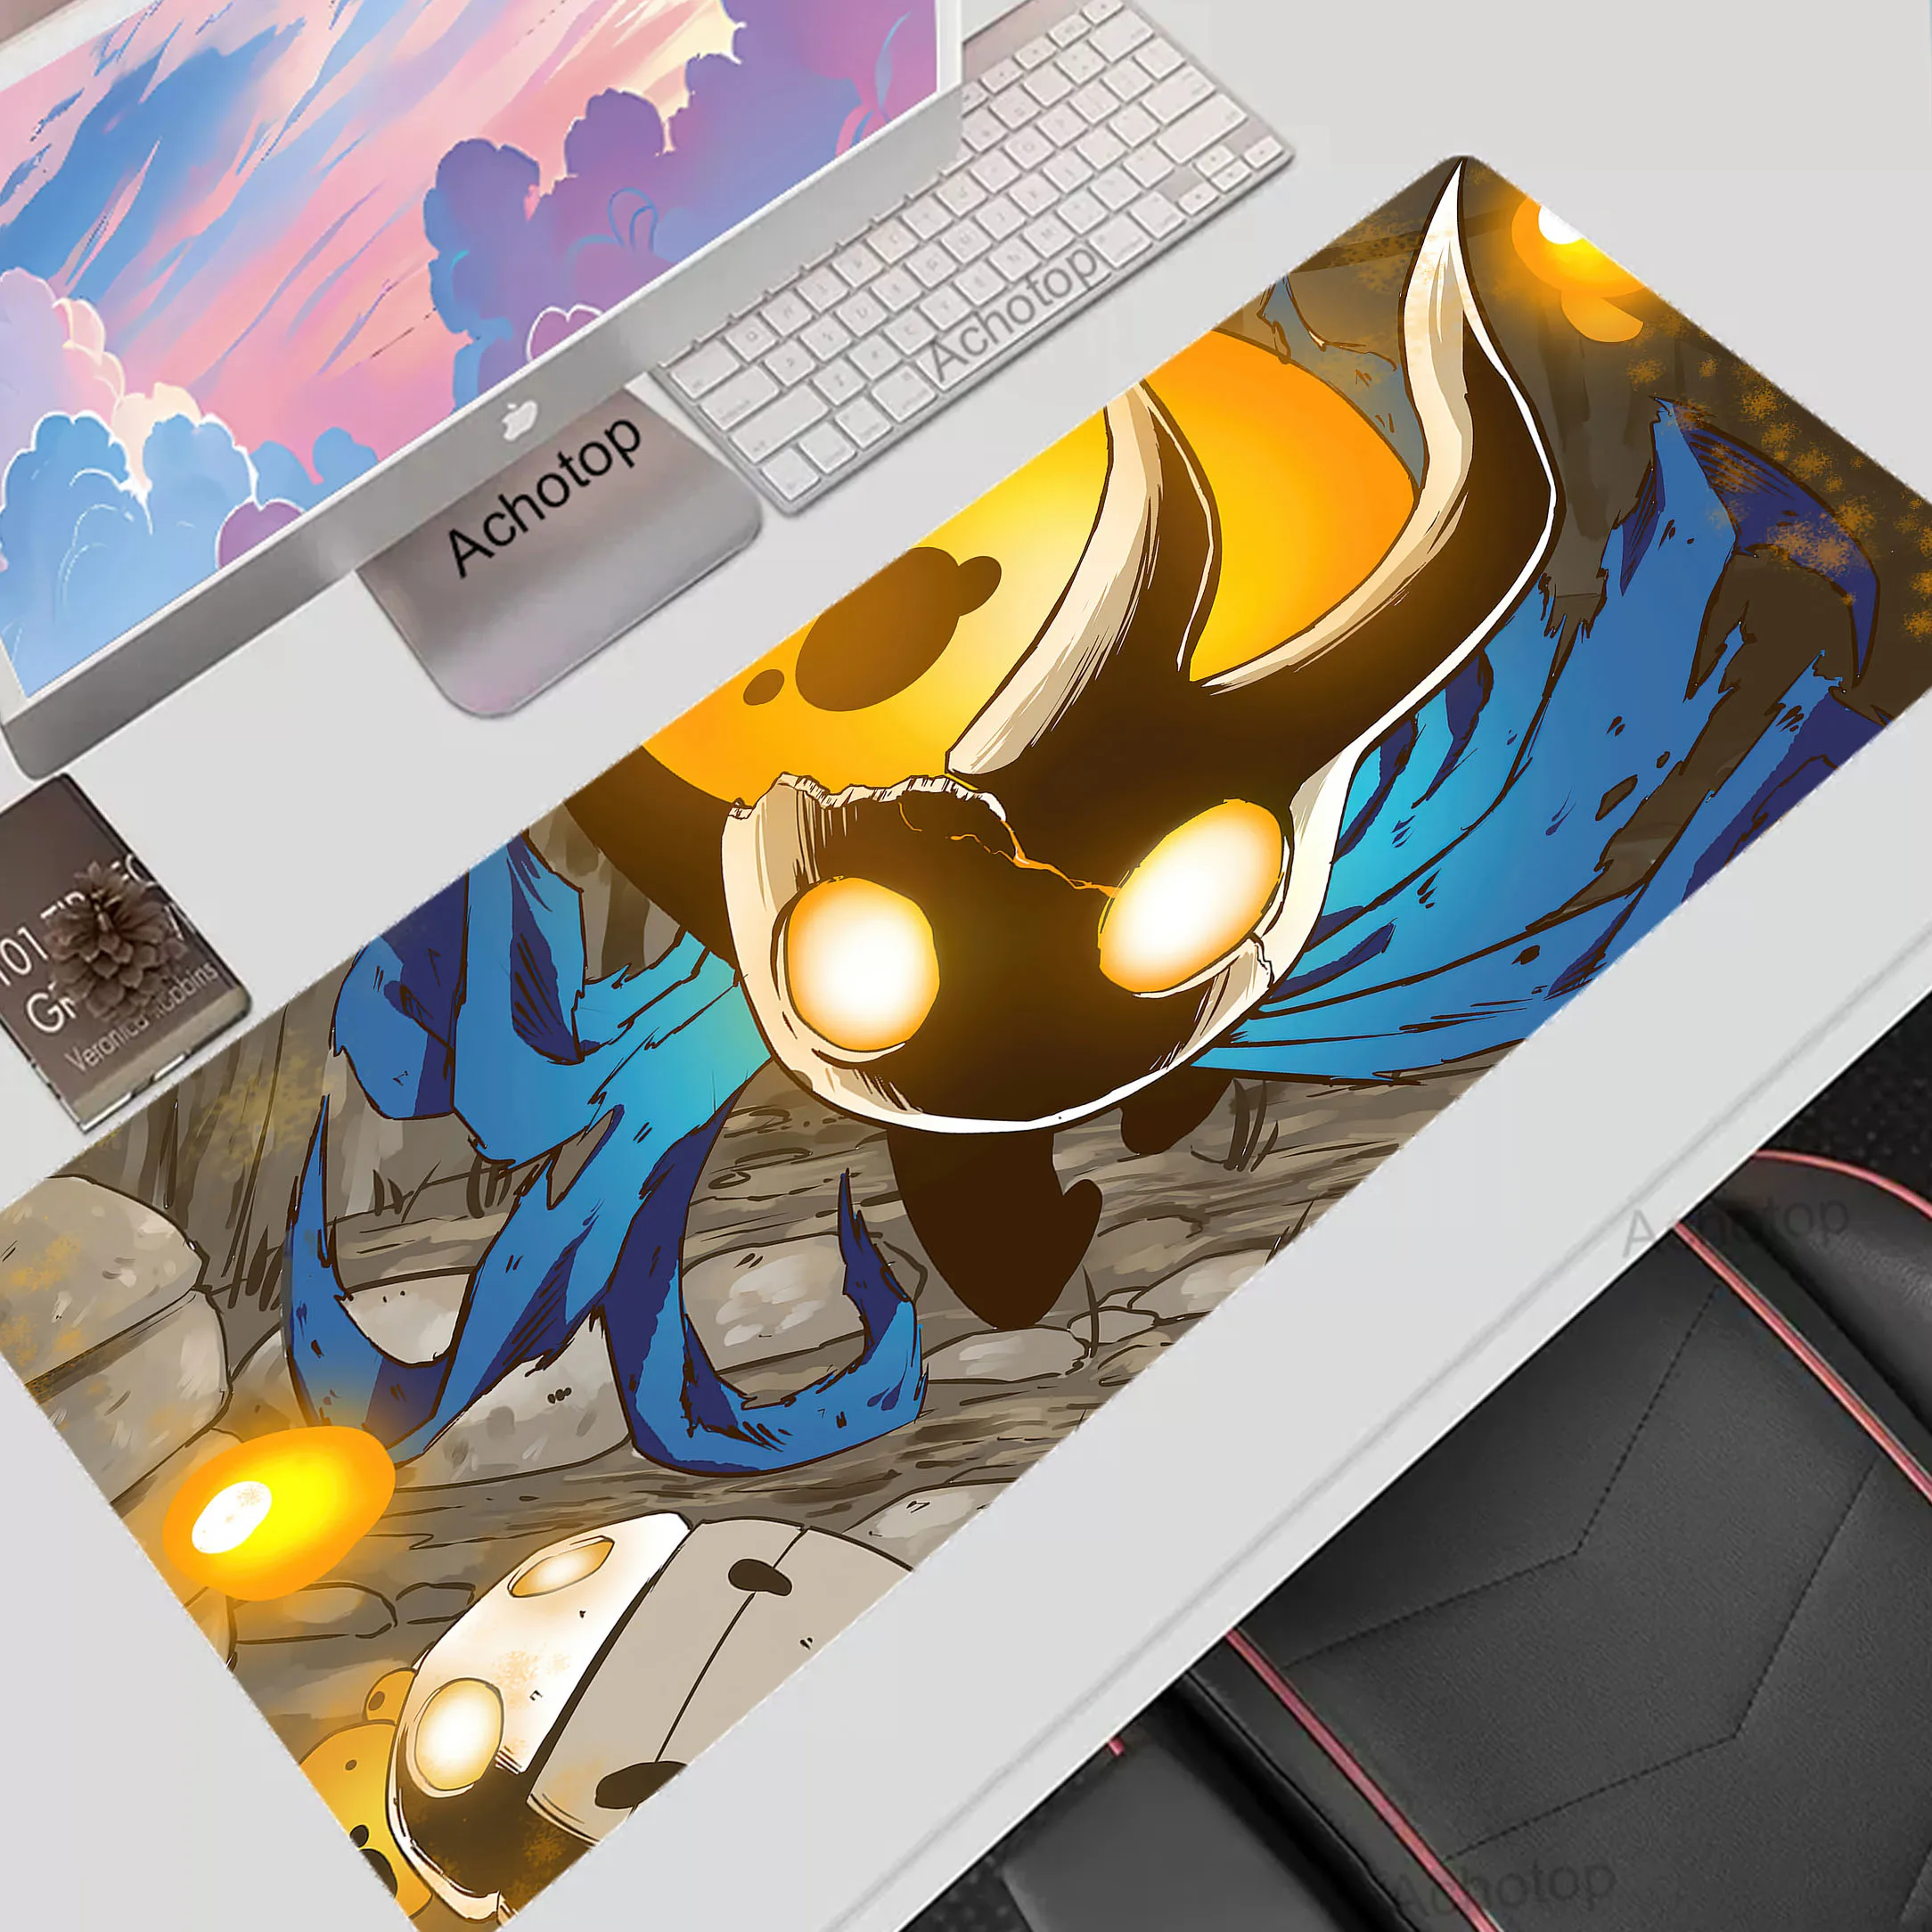 

Hollow Knight Mouse Pad Pc Gamer Mousepad Big Anti-slip Rubber Mouse Mat Office Table Carpet Deskmat Gaming Speed Keyboard Pads